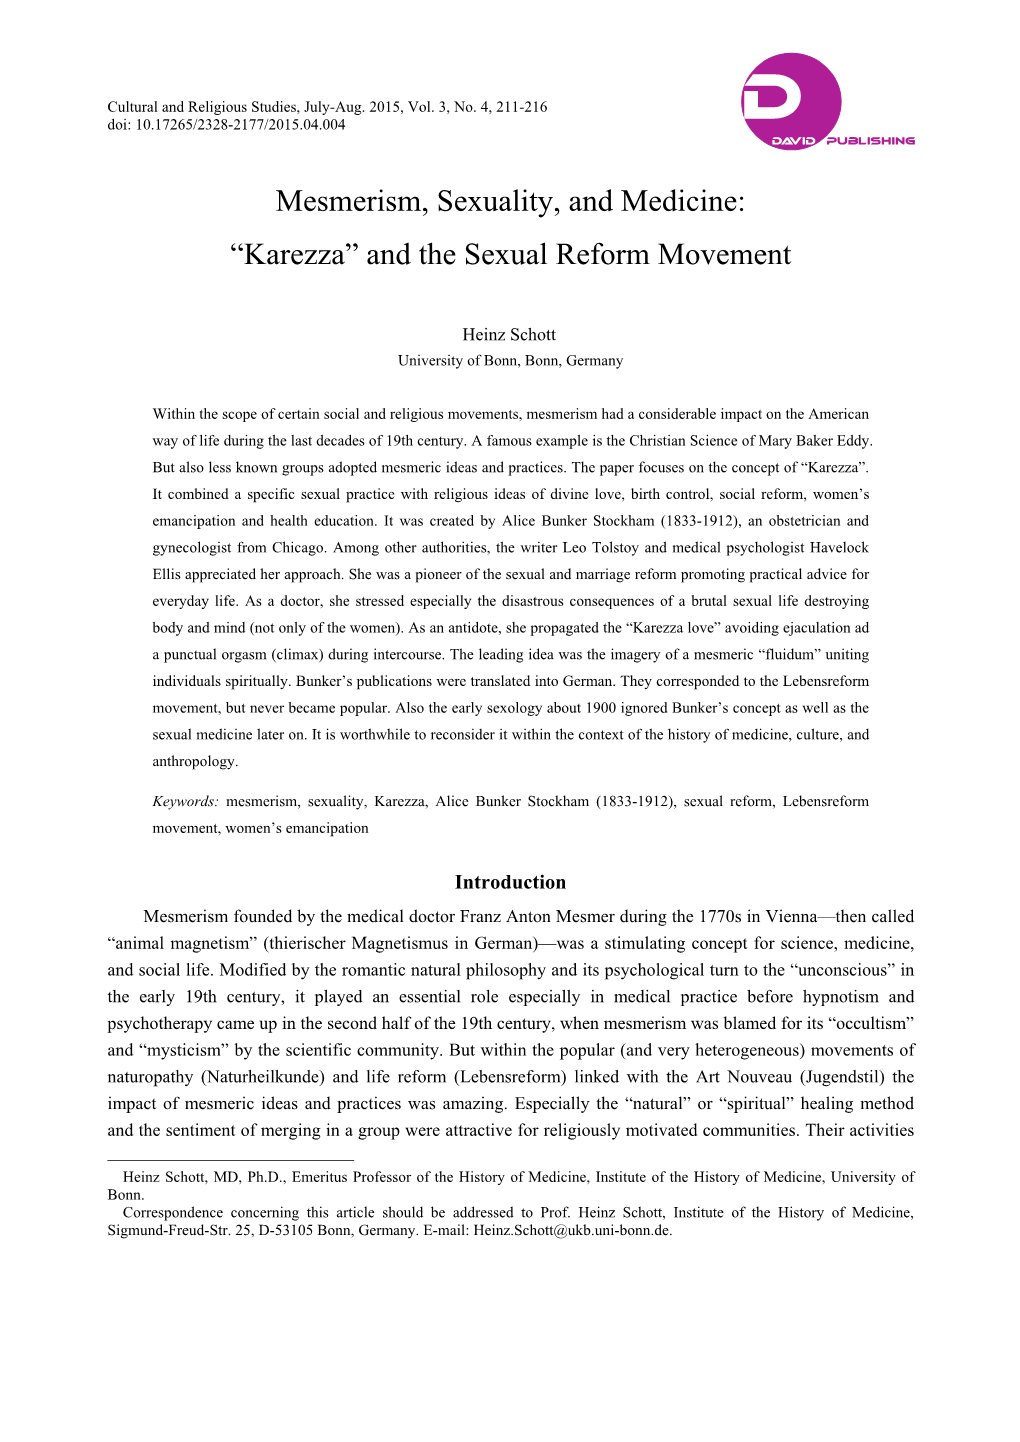 Karezza” and the Sexual Reform Movement